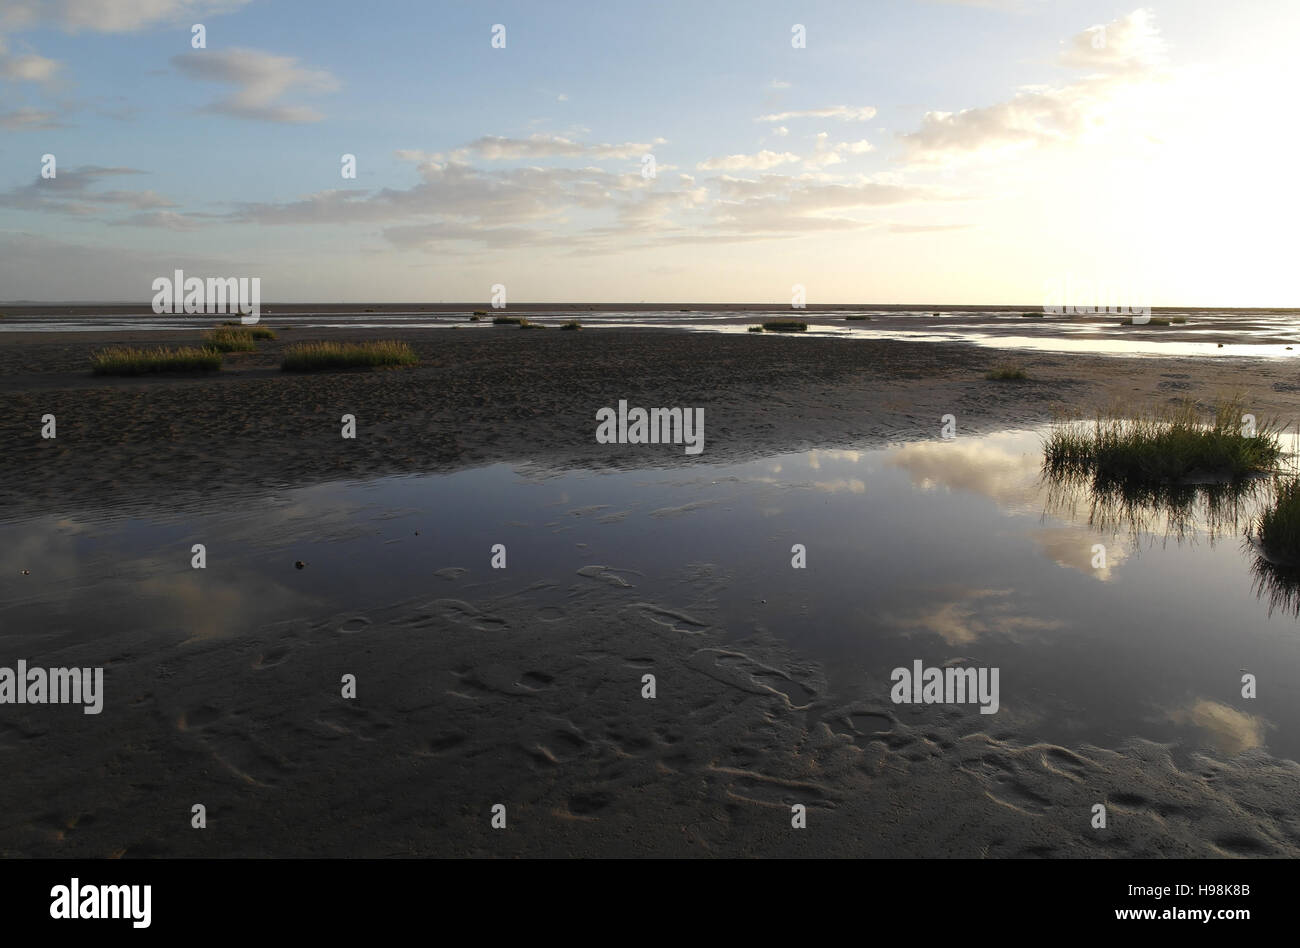 Evening sunshine view wet muddy sand beach with cloud reflection pools and Spartina grass clumps, Fairhaven Outer Promenade, Lytham, Lancashire, UK Stock Photo